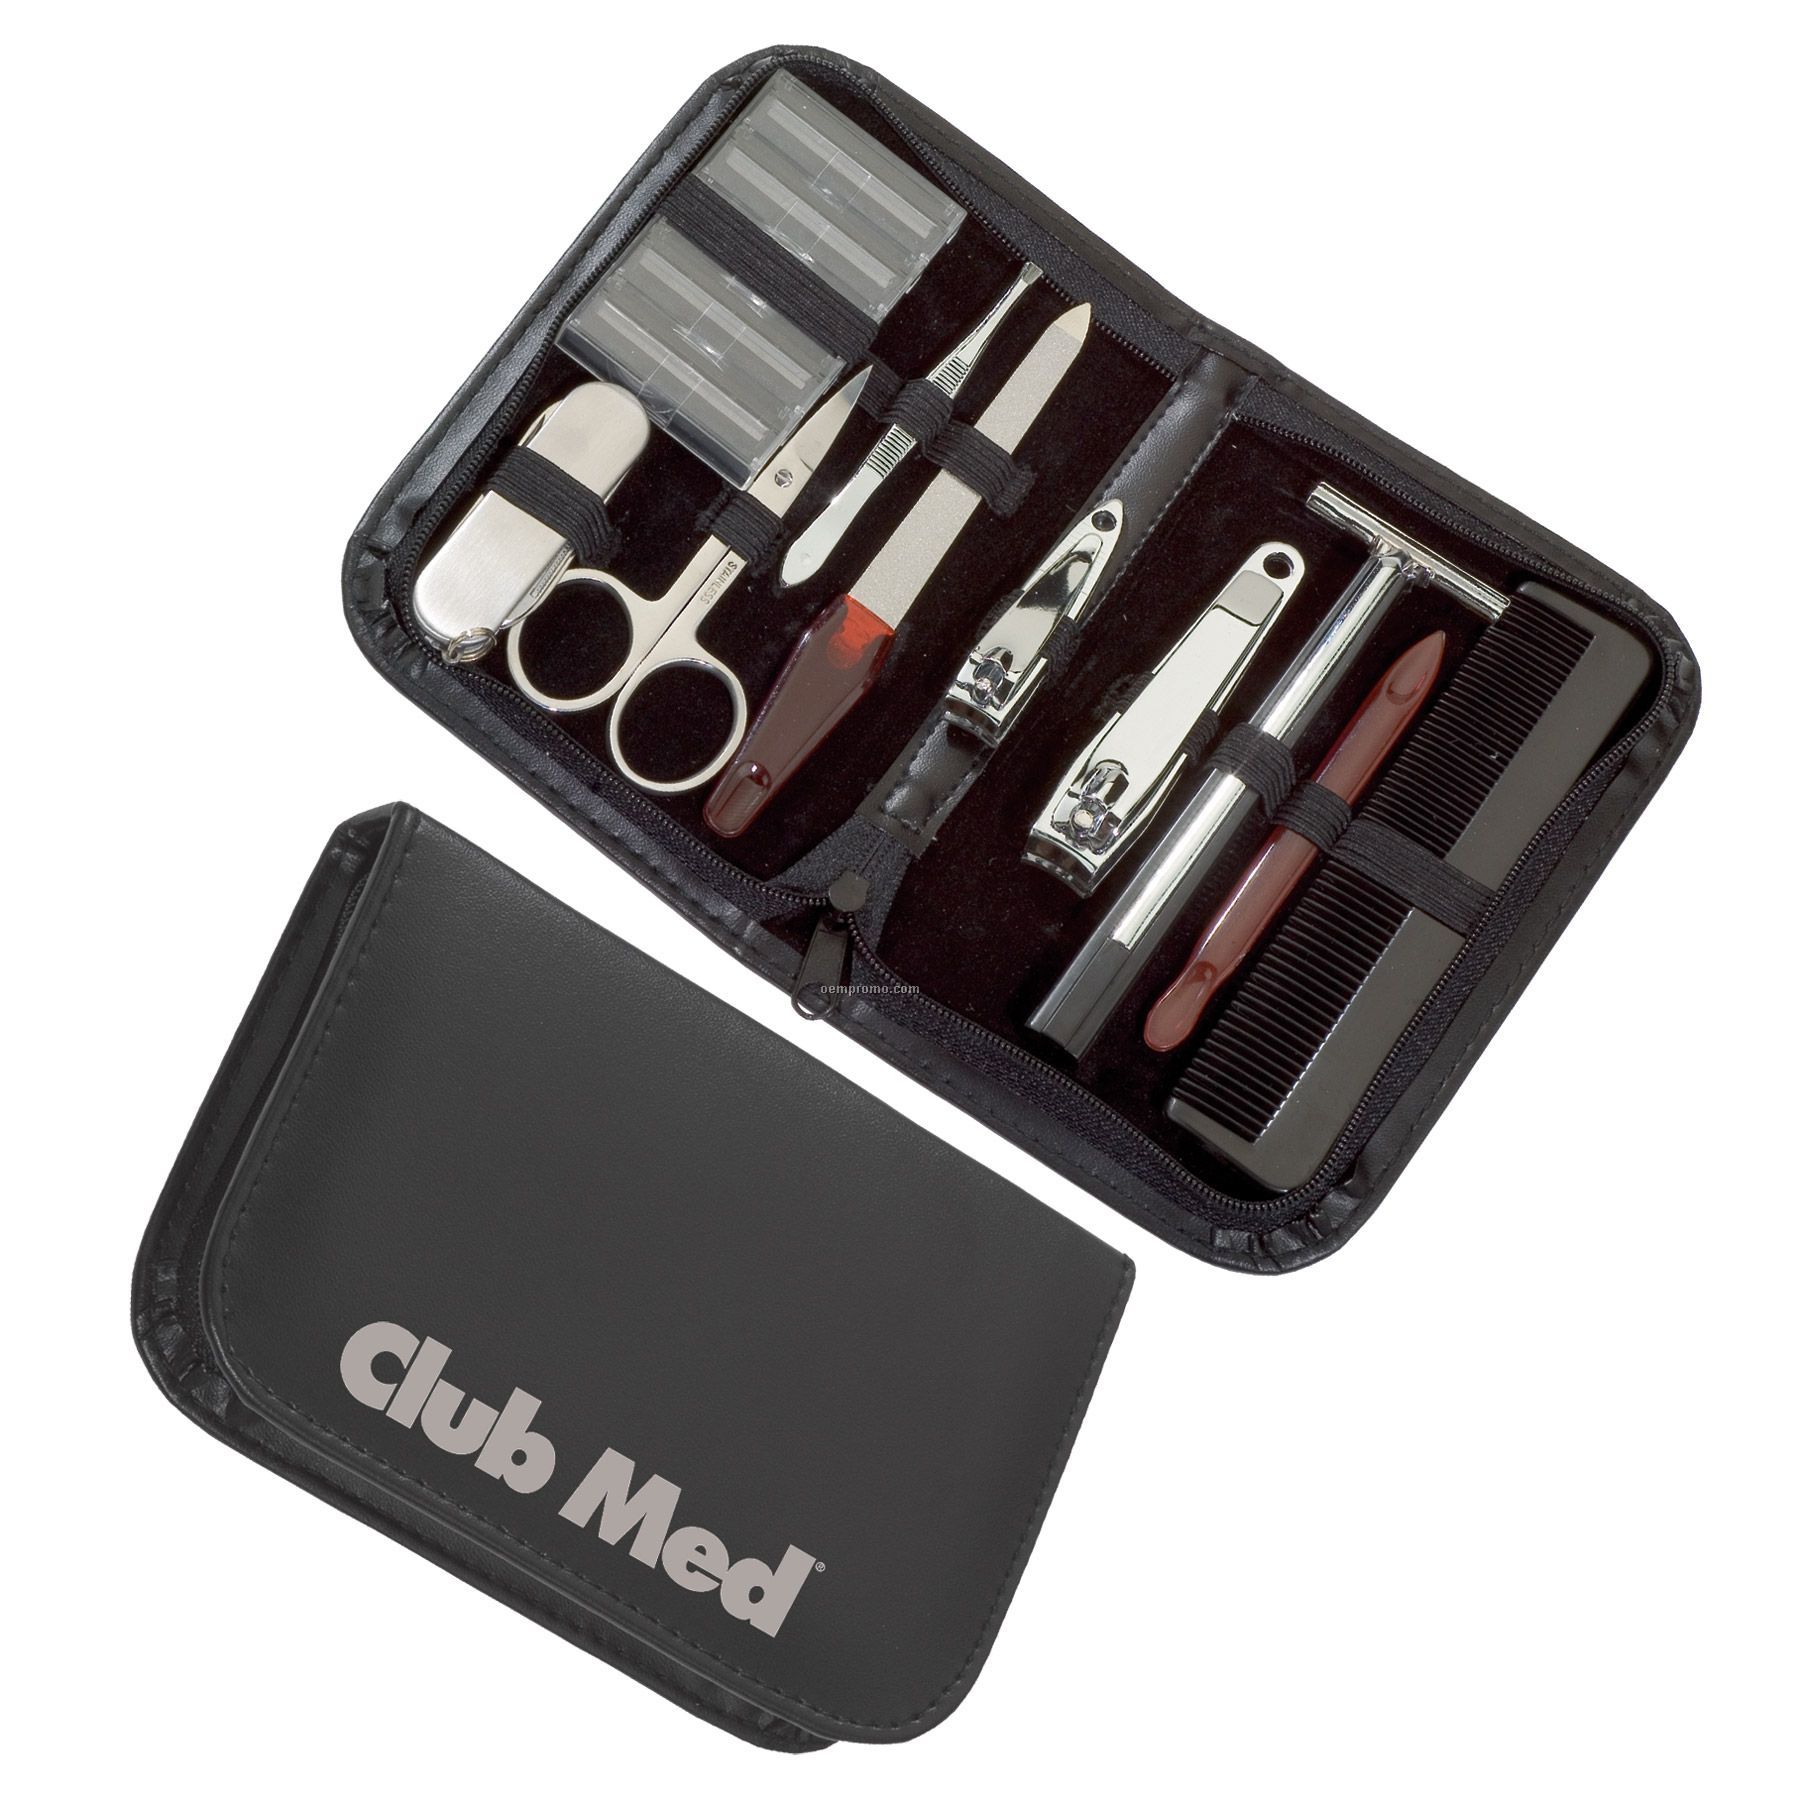 Deluxe Travel Personal Care Manicure Kit